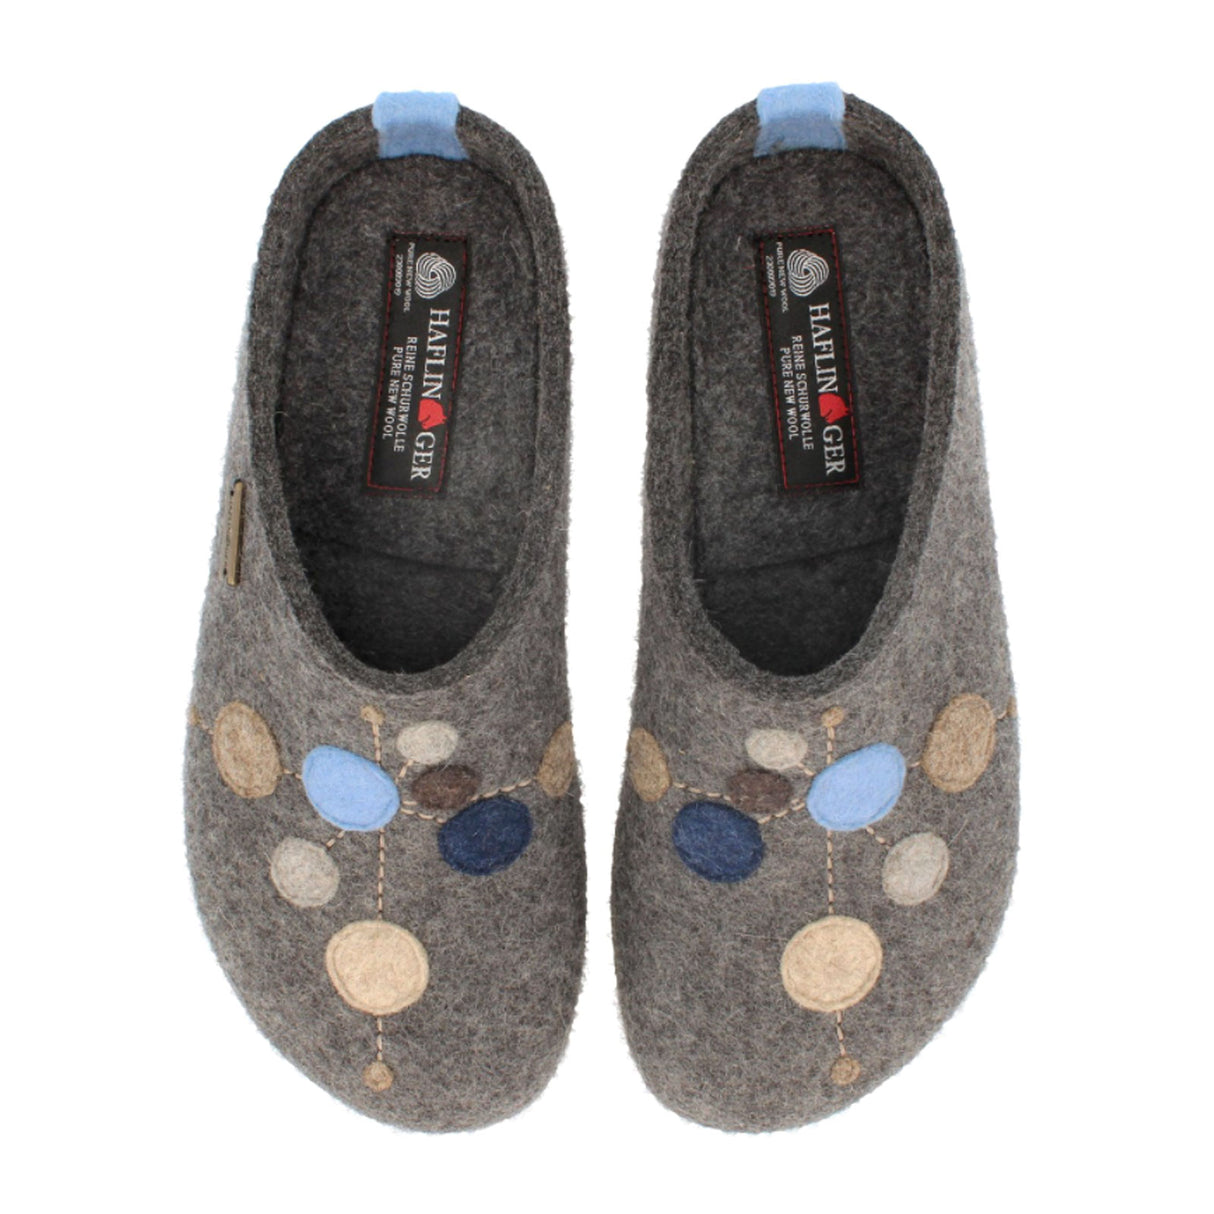 Haflinger Faible Clog (Women) - Grey Dress-Casual - Clogs & Mules - The Heel Shoe Fitters